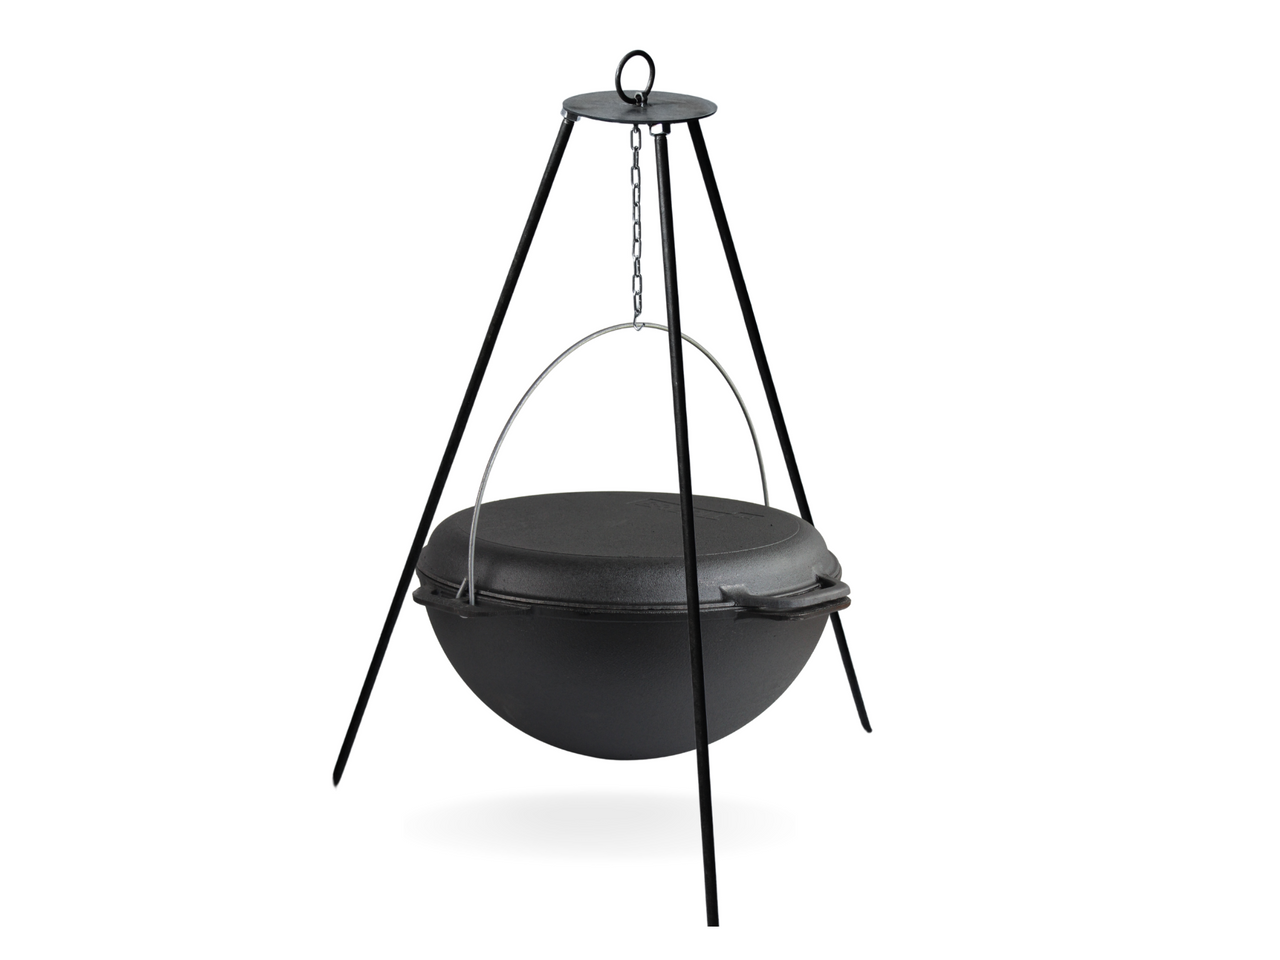 Cast iron asian cauldron 8 L WITH A GRILL LID-FRYING PAN and tripod